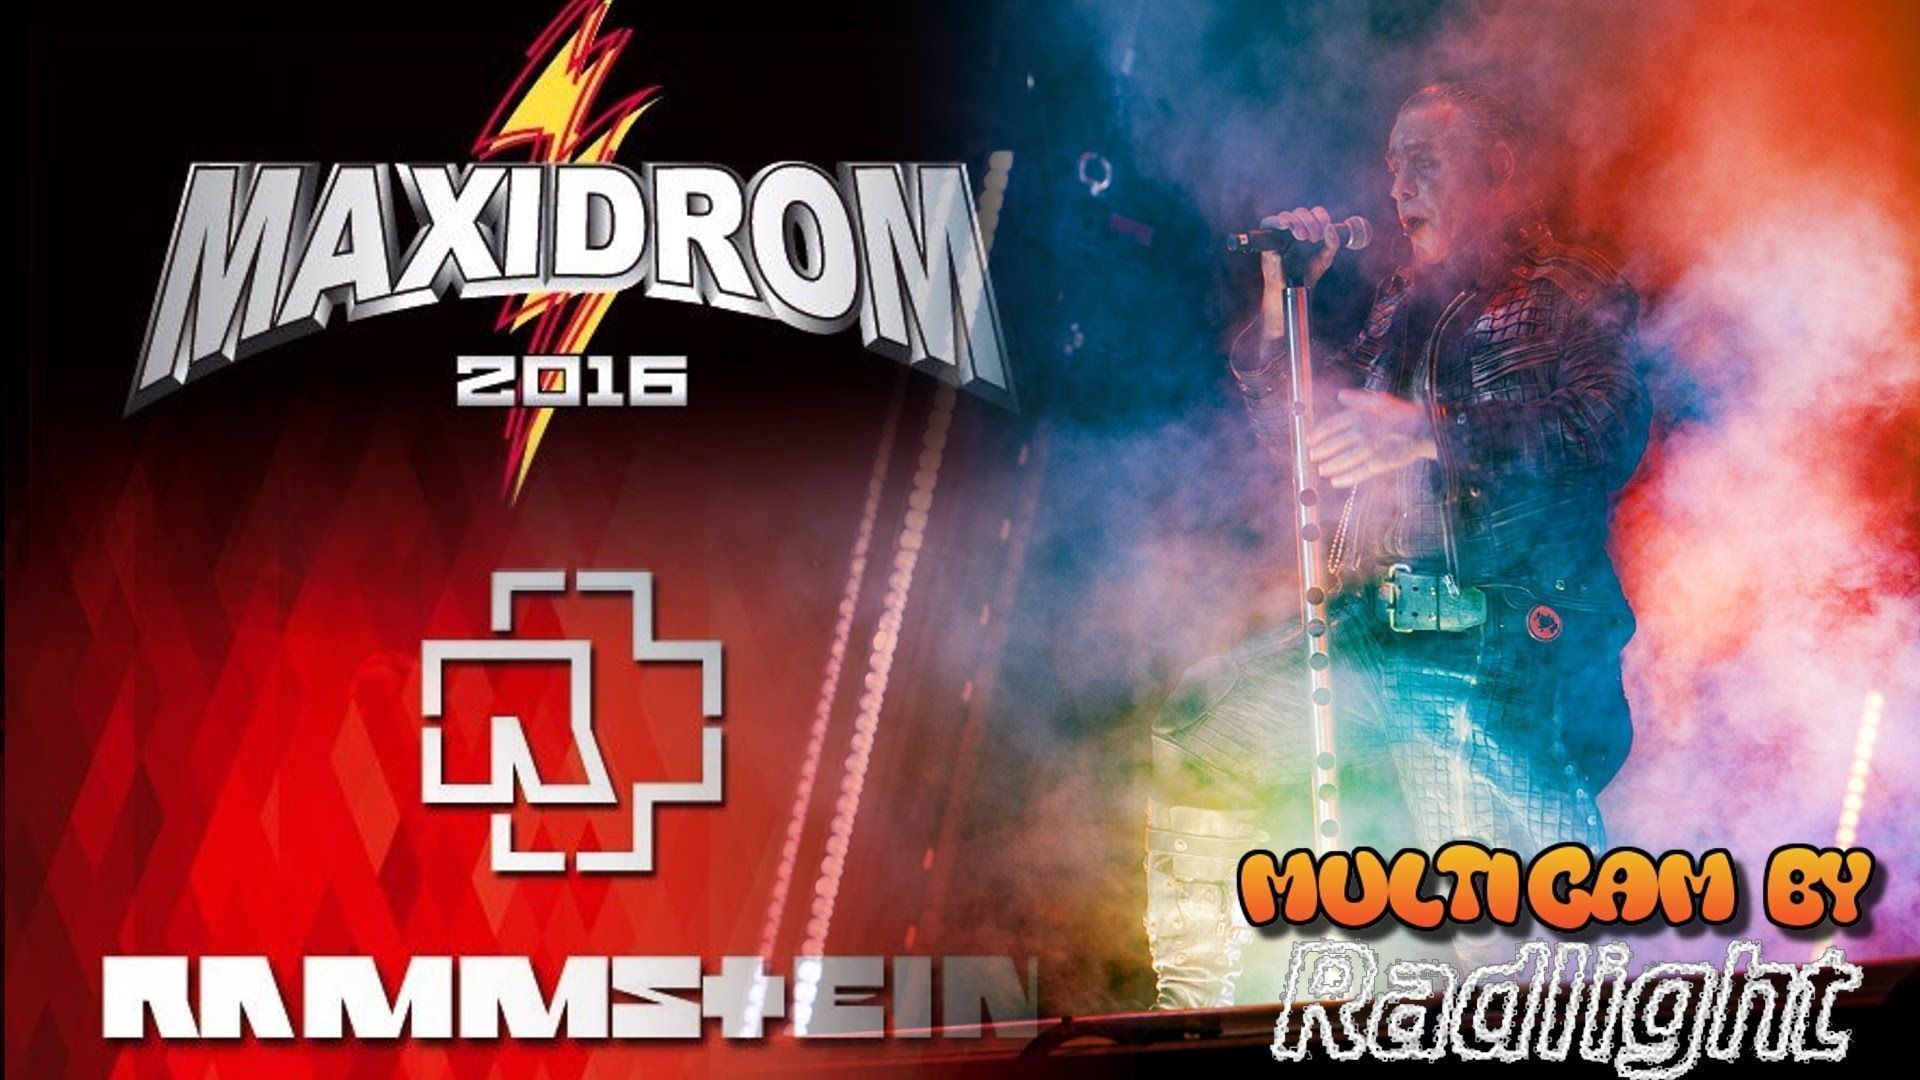 RAMMSTEIN - Live @ MAXIDROM 2016, Moscow. 19.06.2016.Full show